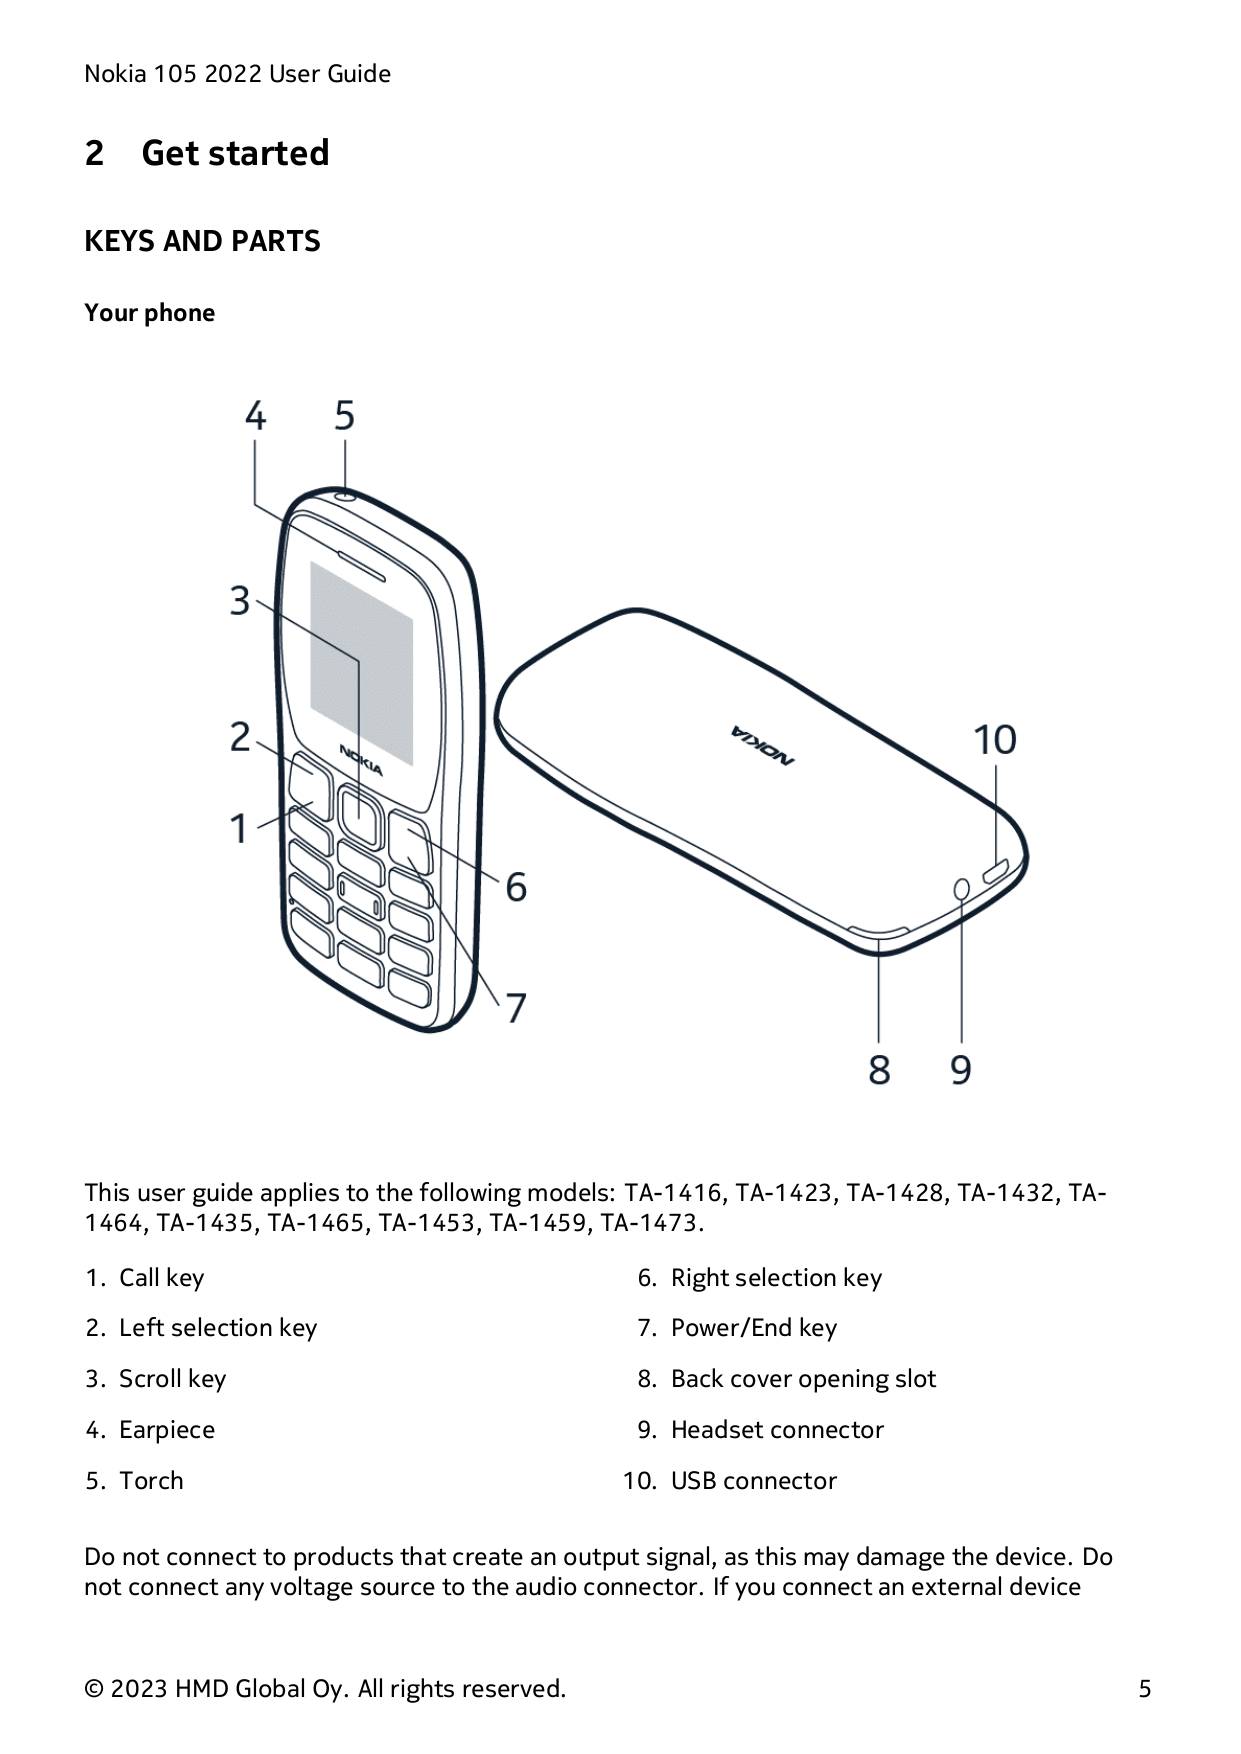 Nokia 105 2022 User Guide2Get startedKEYS AND PARTSYour phoneThis user guide applies to the following models: TA-1416, TA-1423, 